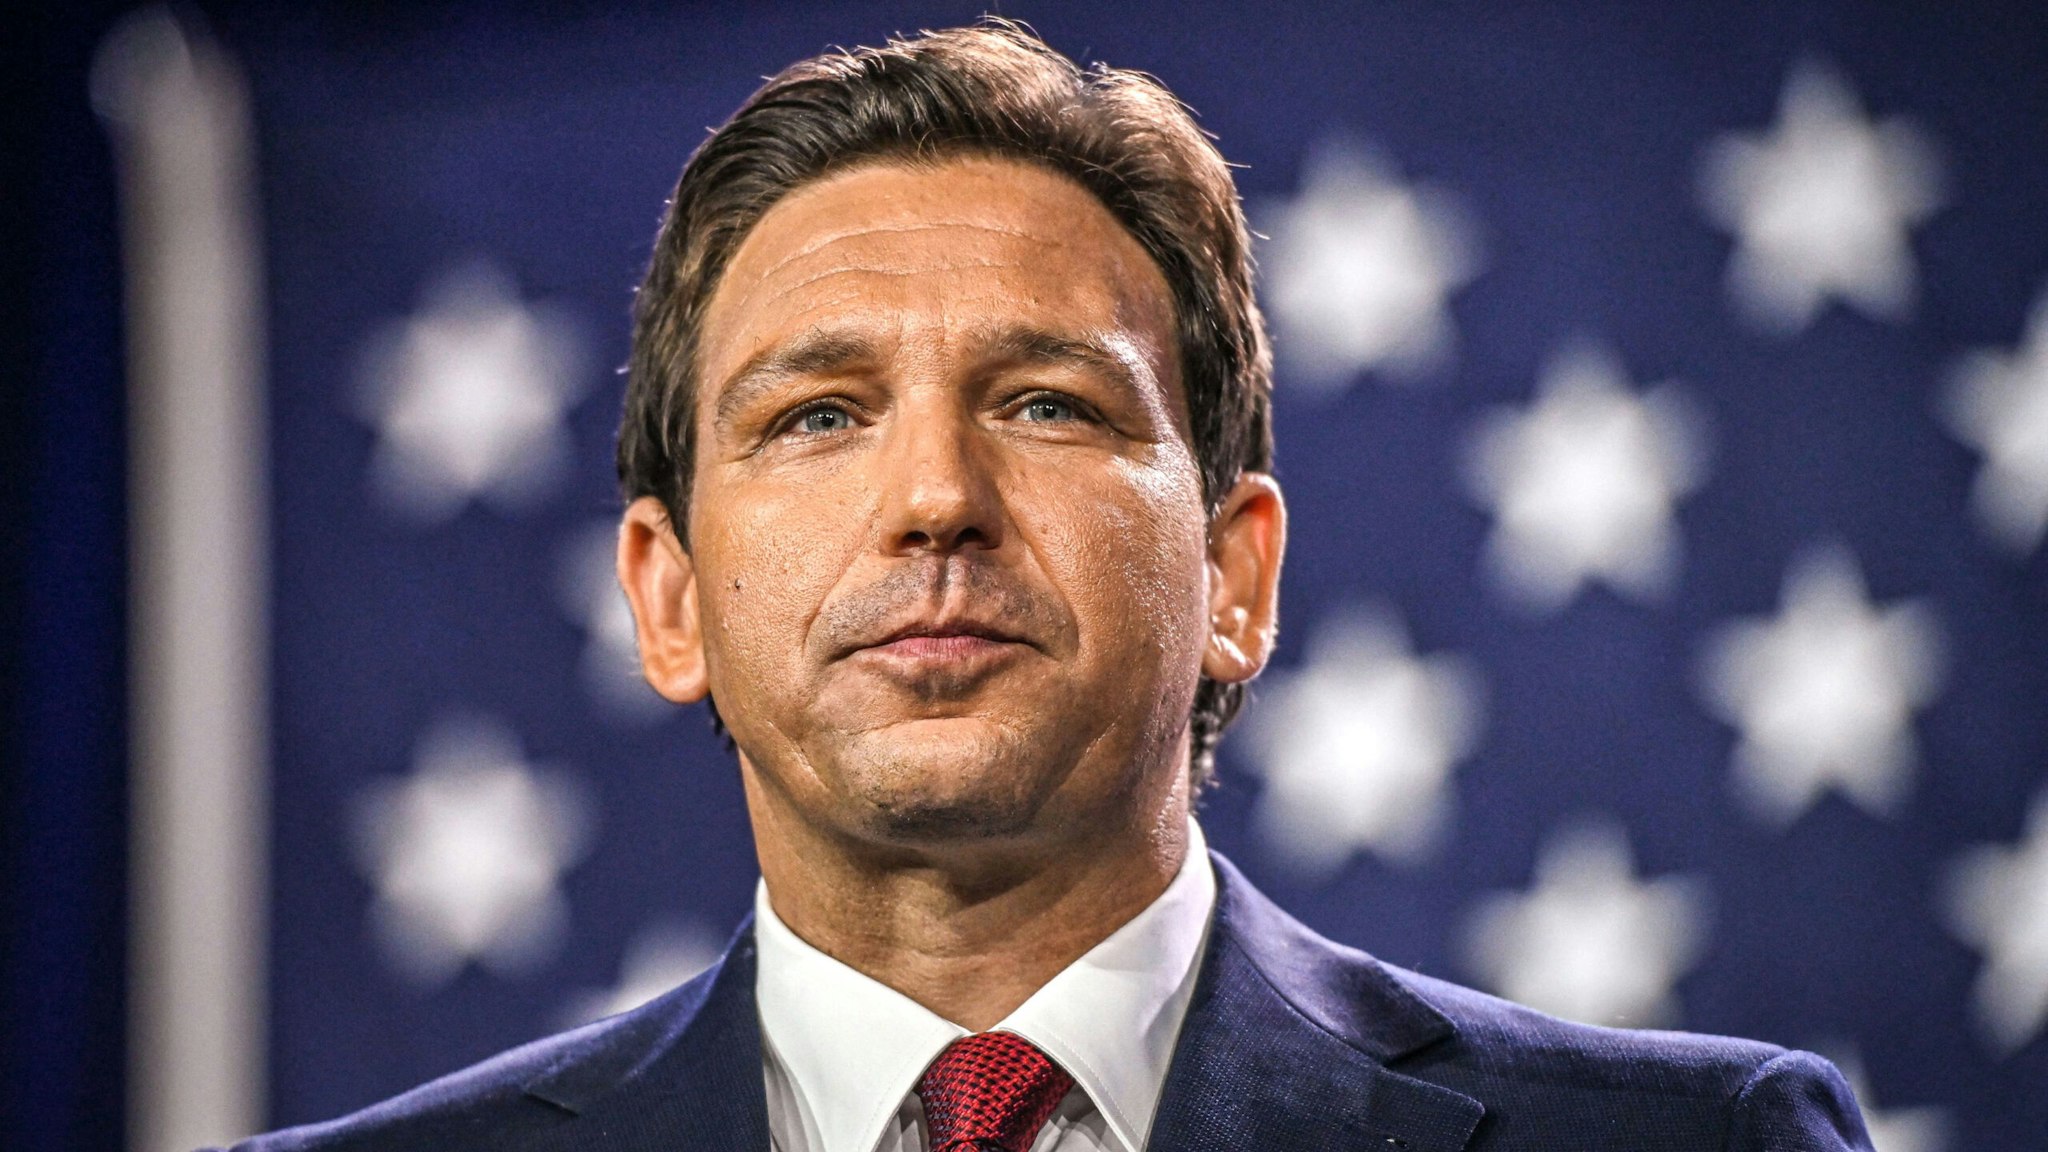 Republican gubernatorial candidate for Florida Ron DeSantis speaks during an election night watch party at the Convention Center in Tampa, Florida, on November 8, 2022. - Florida Governor Ron DeSantis, who has been tipped as a possible 2024 presidential candidate, was projected as one of the early winners of the night in Tuesday's midterm election.